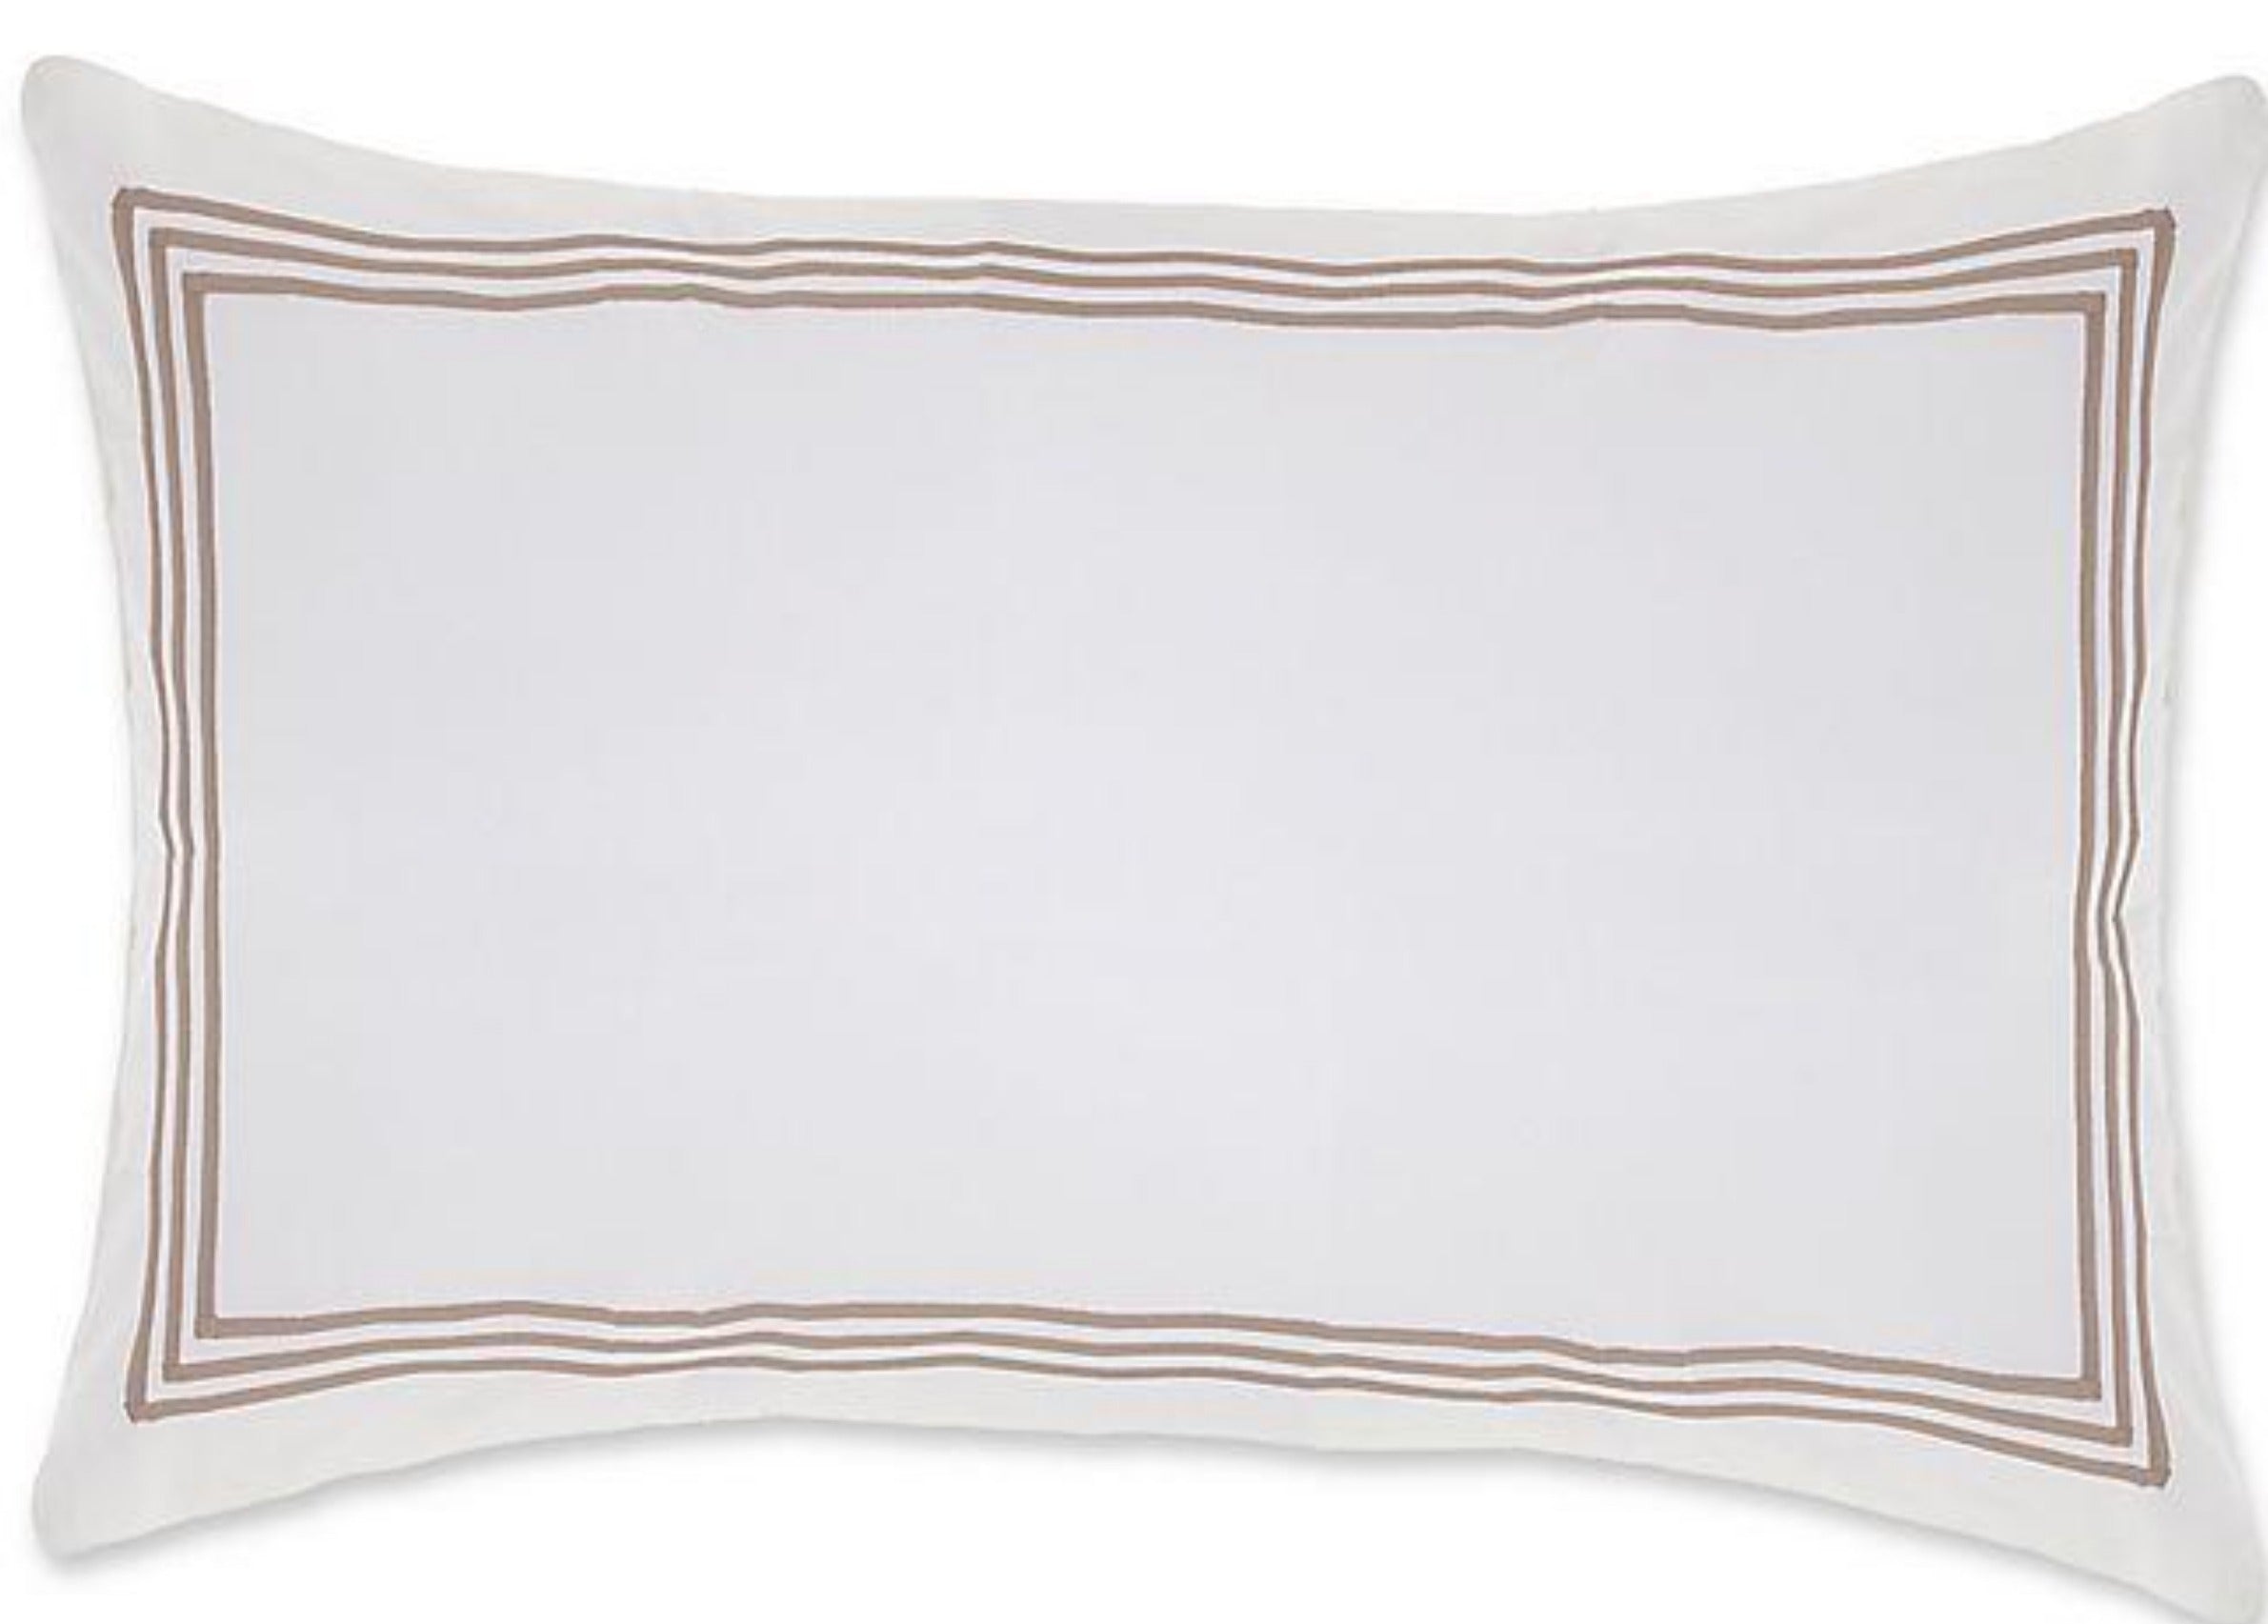 King Size Embroidered Sham